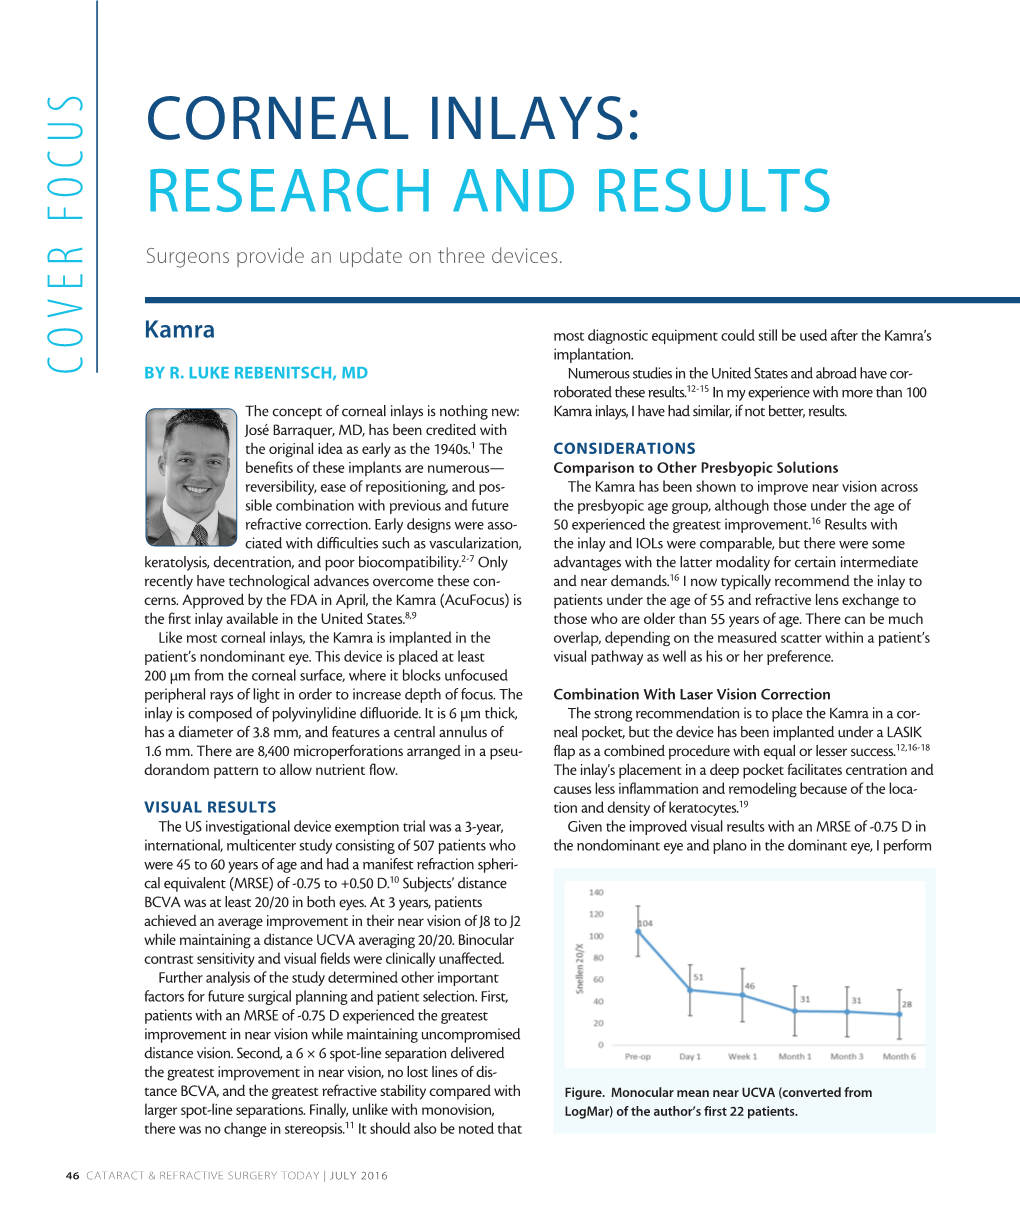 CORNEAL INLAYS: RESEARCH and RESULTS Surgeons Provide an Update on Three Devices